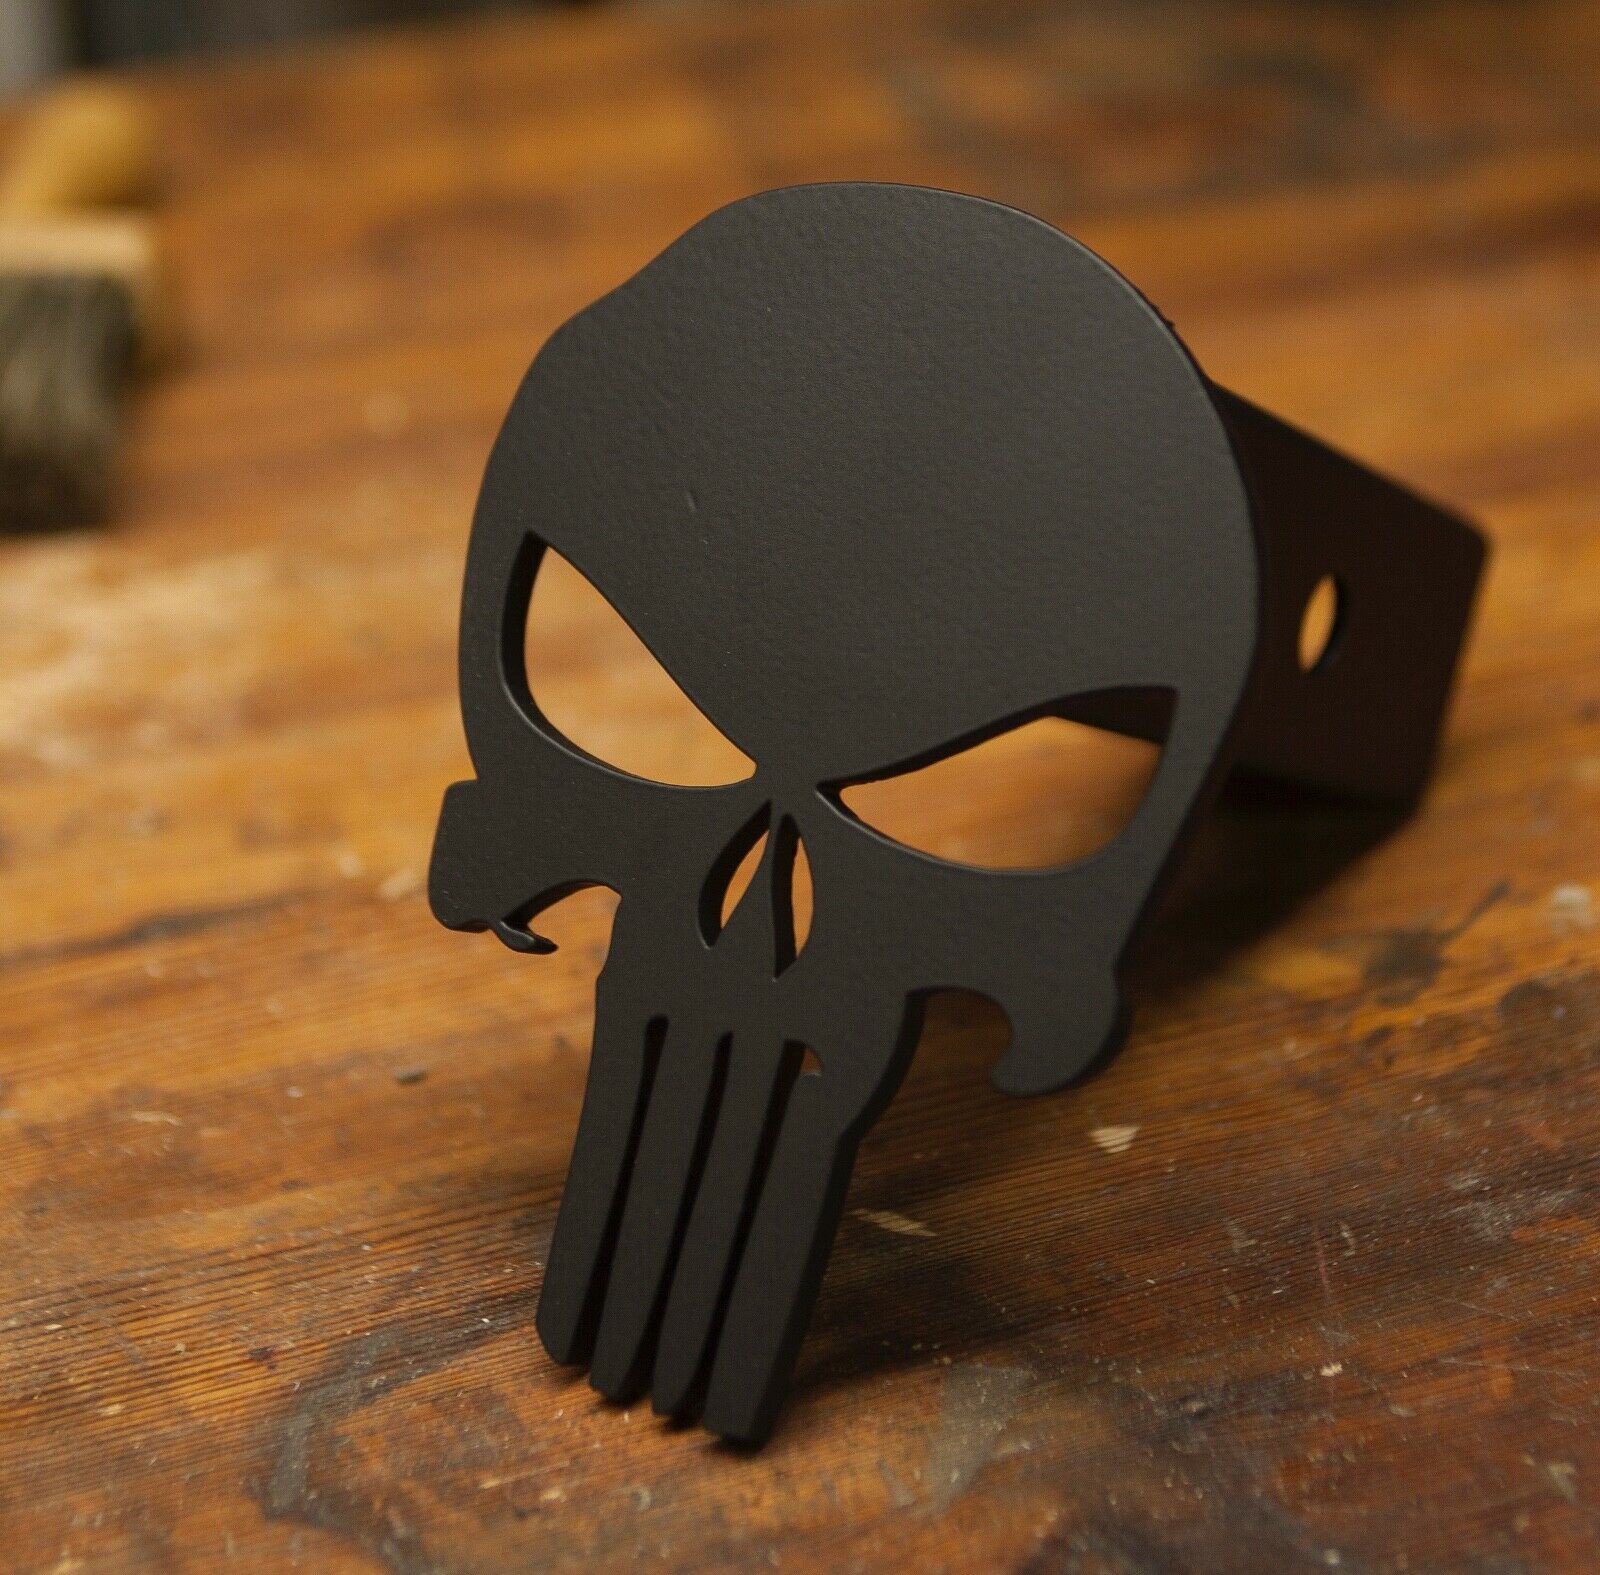 Punisher Trailer Hitch Cover - Steel and Powder Coated - Fits 2